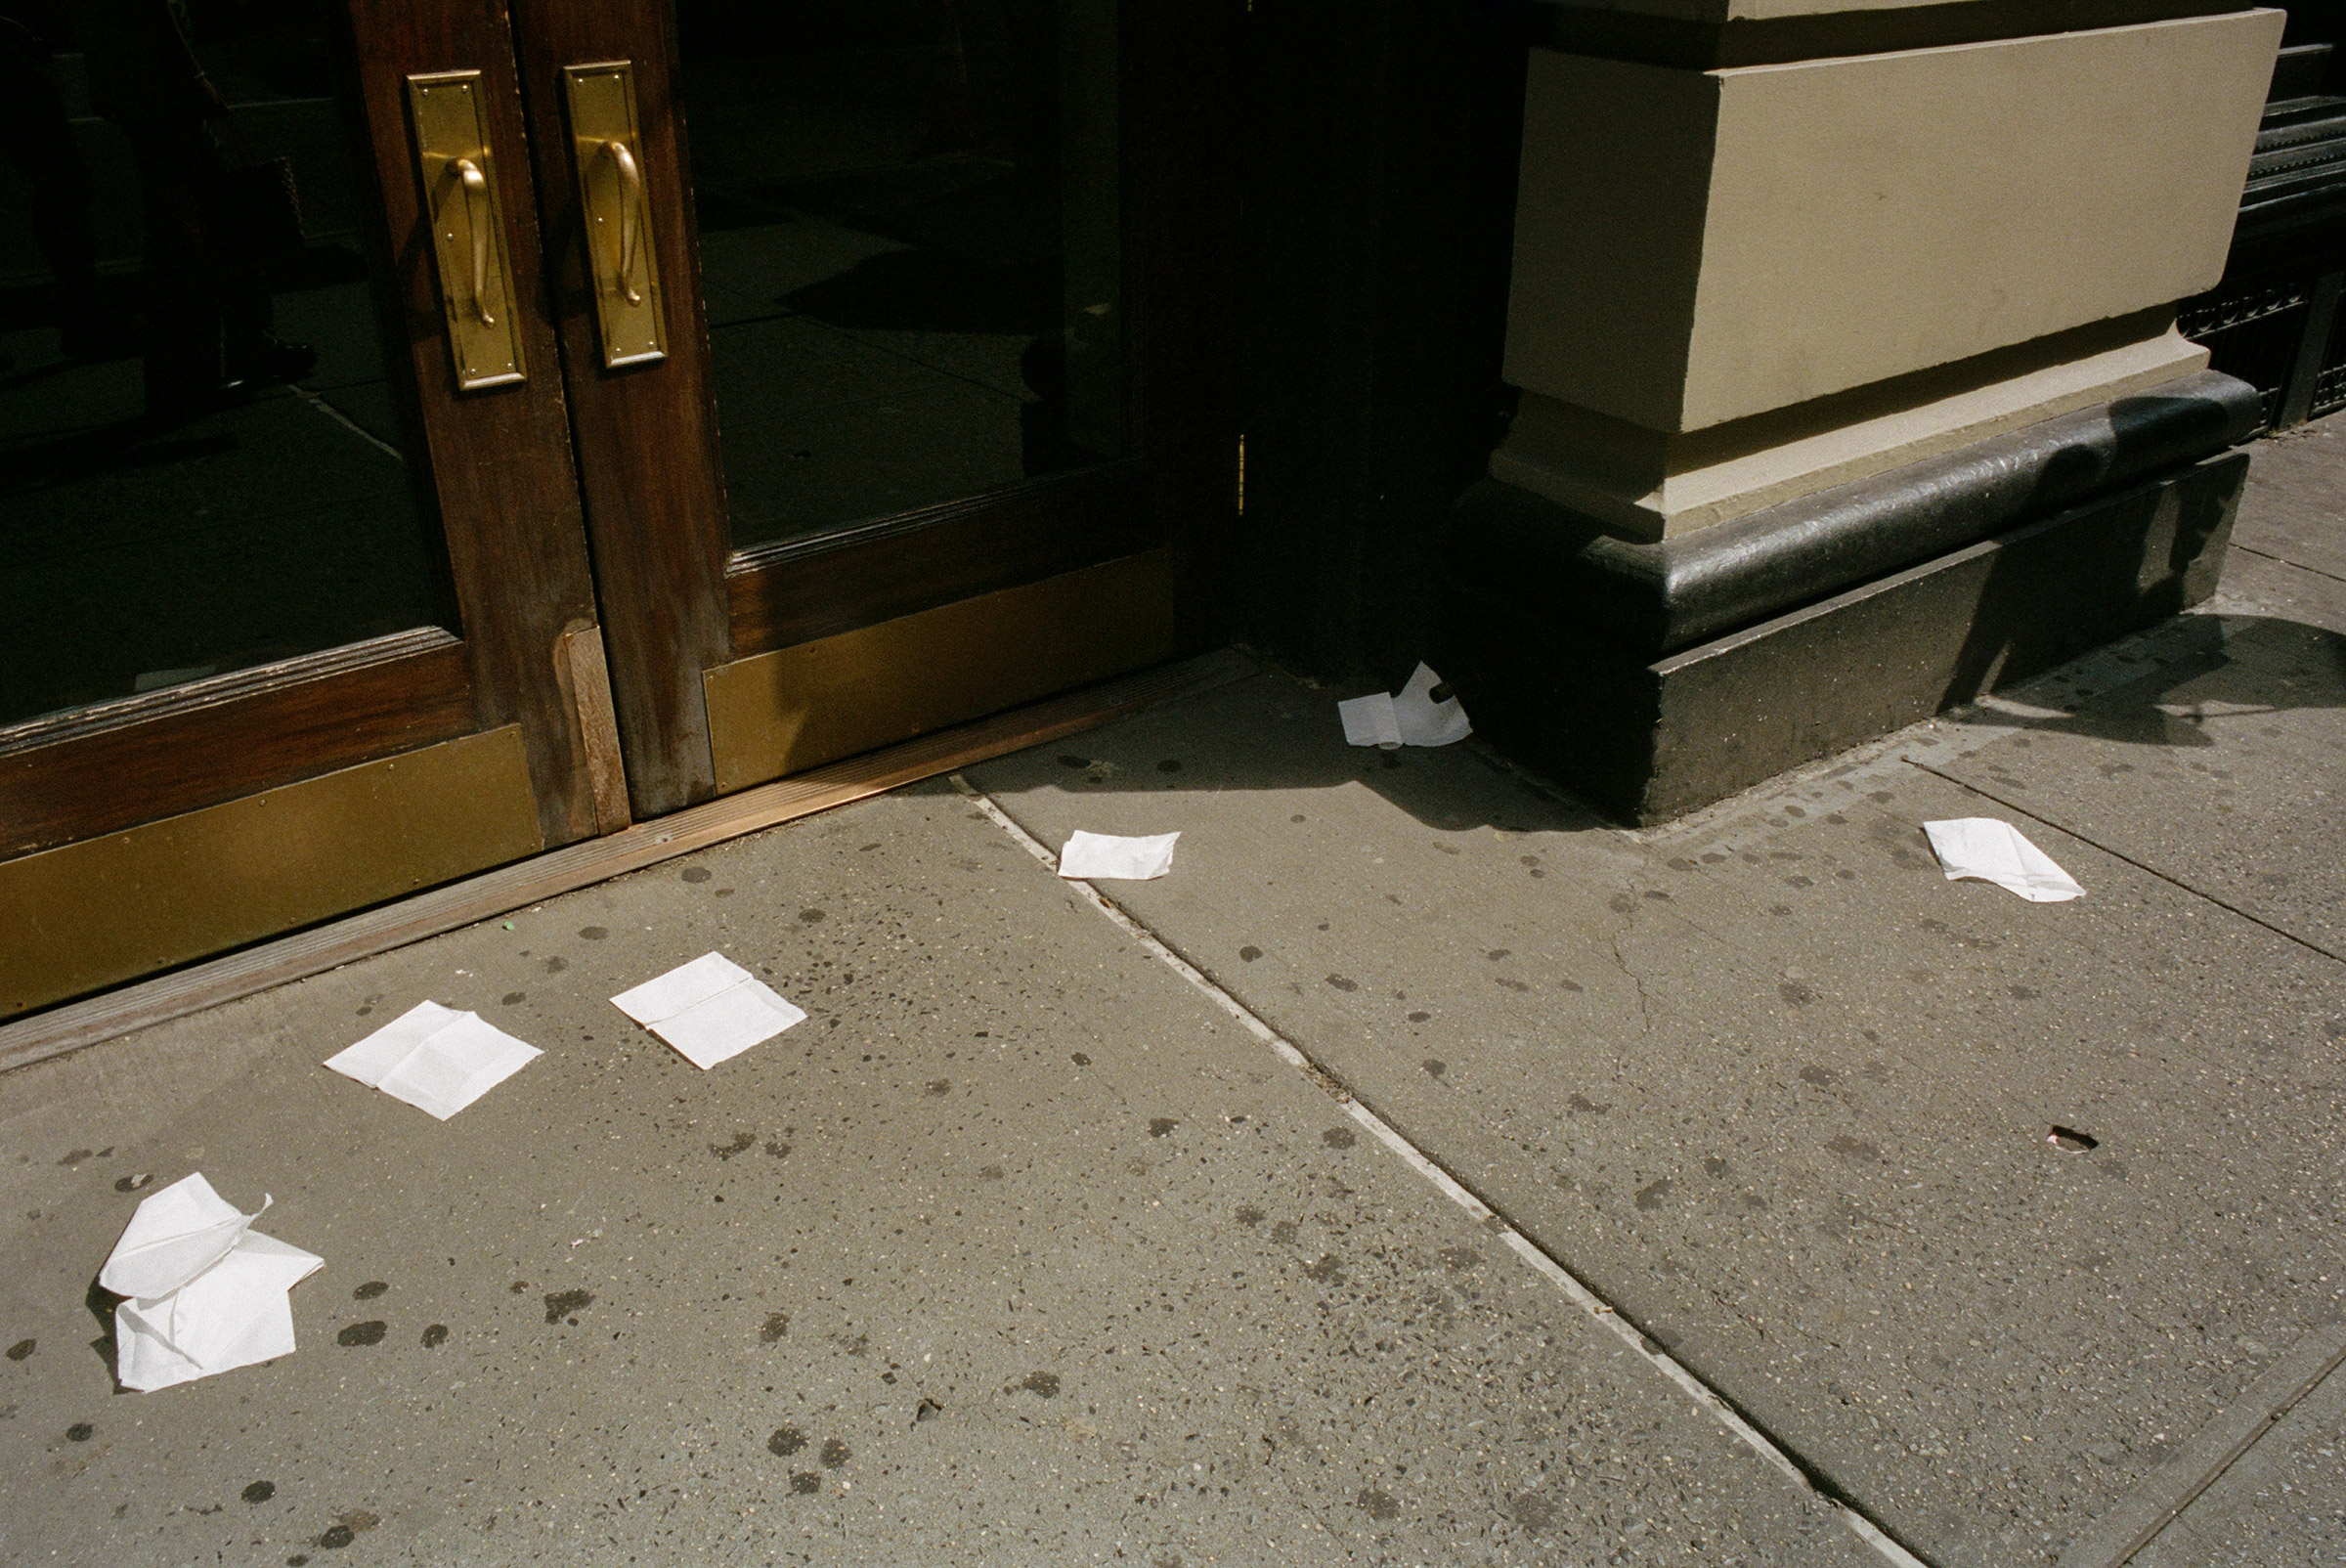 A trail of napkins on Broadway in SoHo, Aug. 6, 2021.